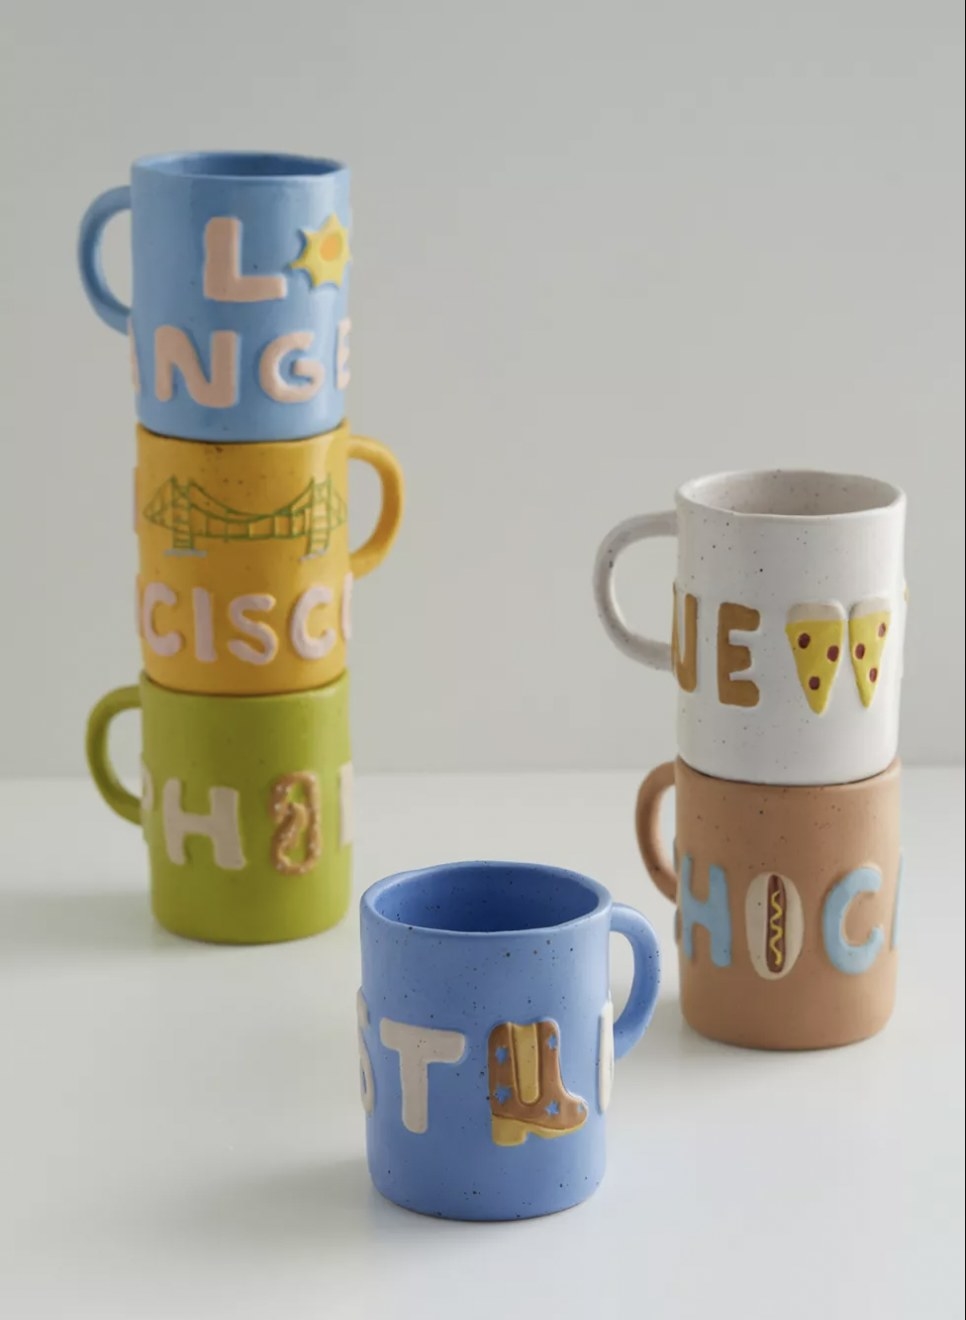 Six mugs in different colors with different city names on them